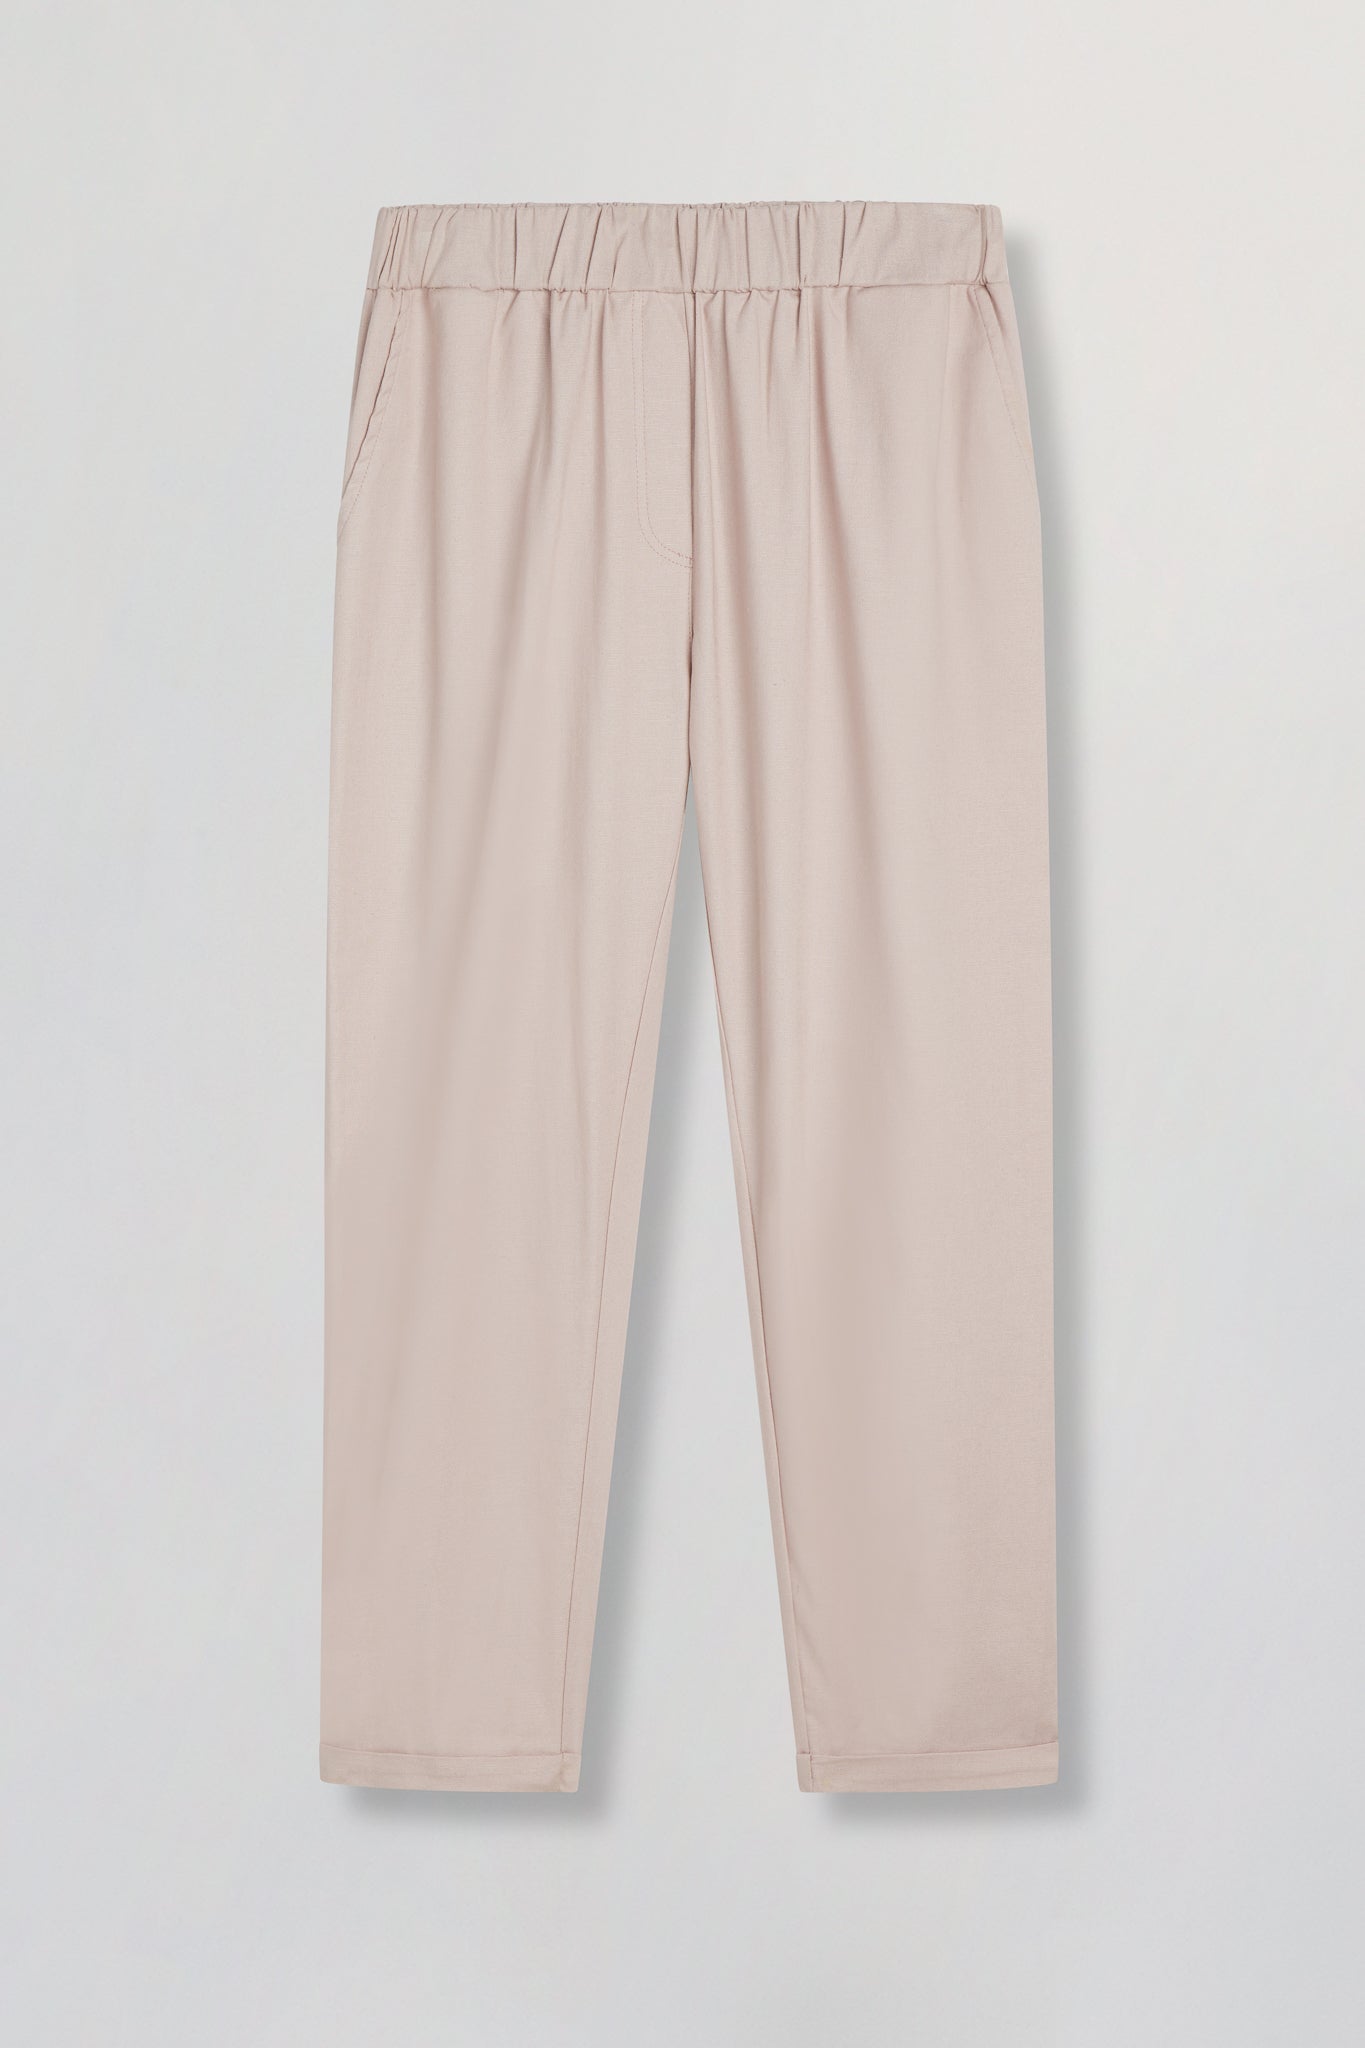 Relaxed linen pants with pockets in tan